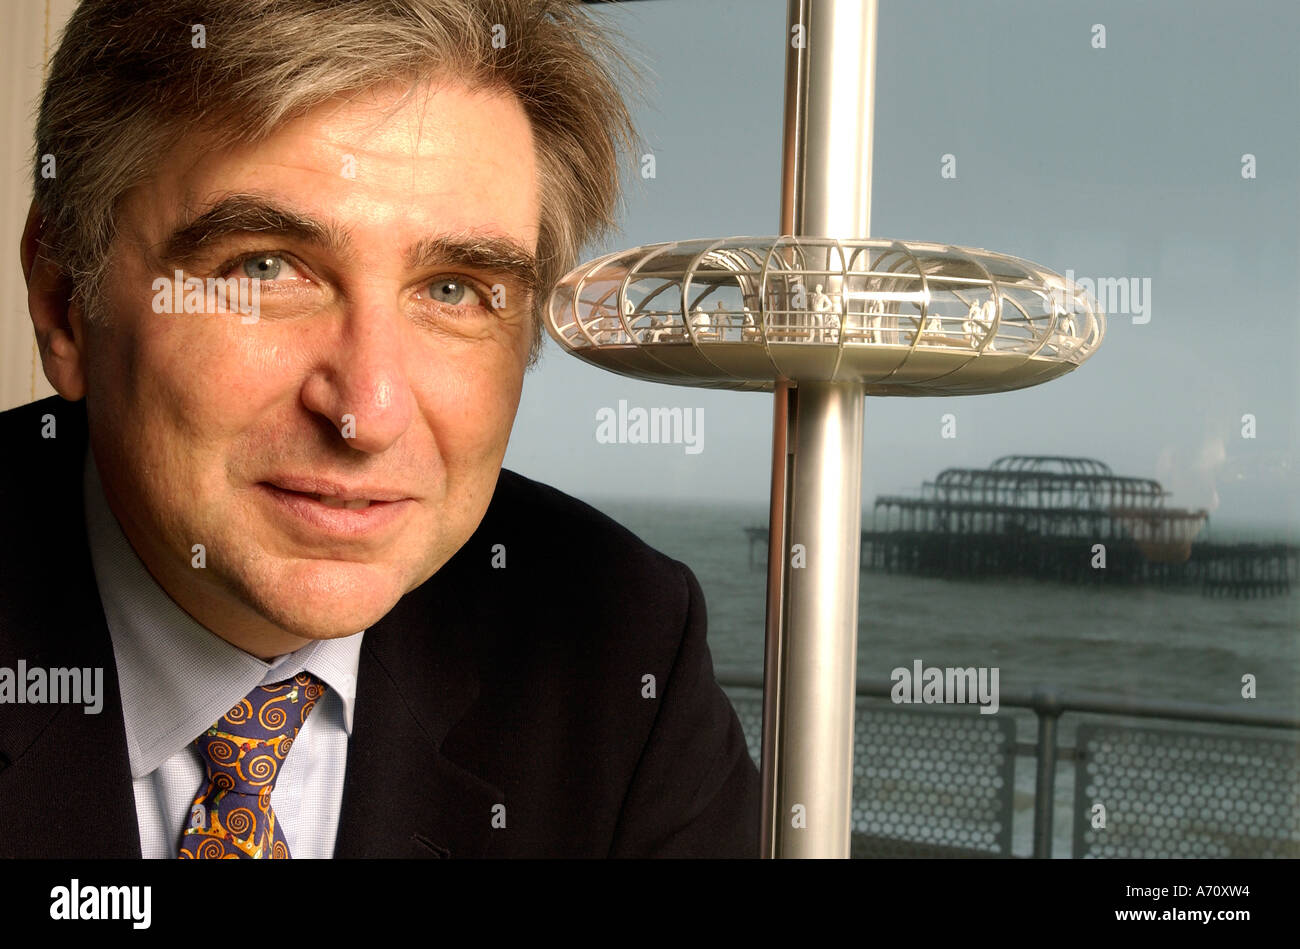 Architect <b>David Marks</b> designer of the London Eye with a model of the pod of ... - architect-david-marks-designer-of-the-london-eye-with-a-model-of-the-A70XW4